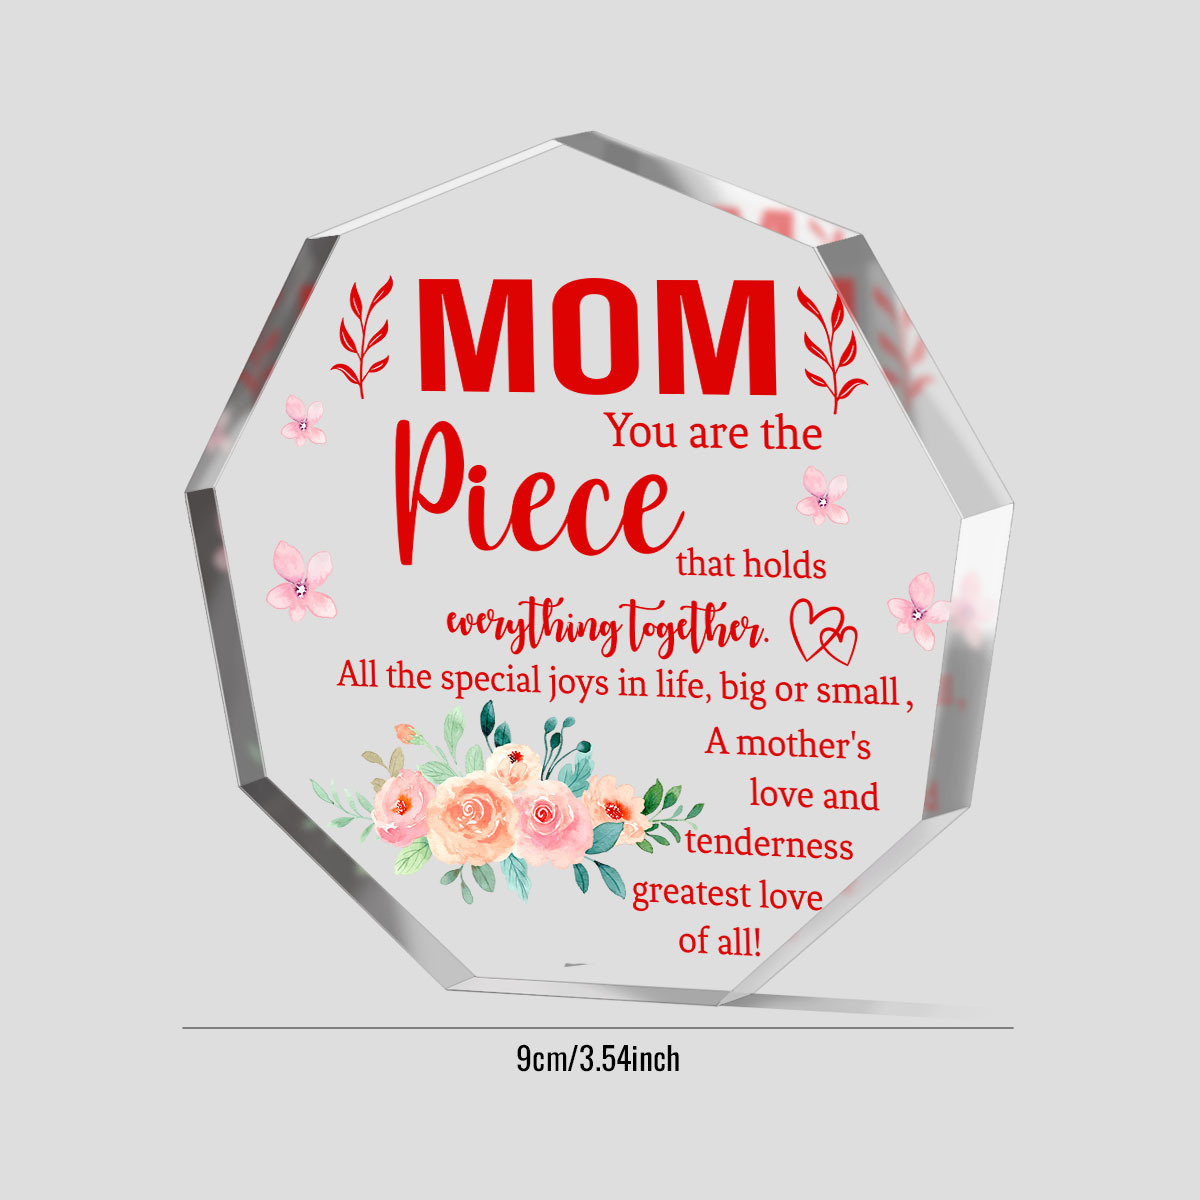 Christmas Gift Ideas For Mom From Daughter, Son, Christmas, Birthday Gifts  For Mom, Grandma, Mother In Law, Bonus Mom, Presents For Mom